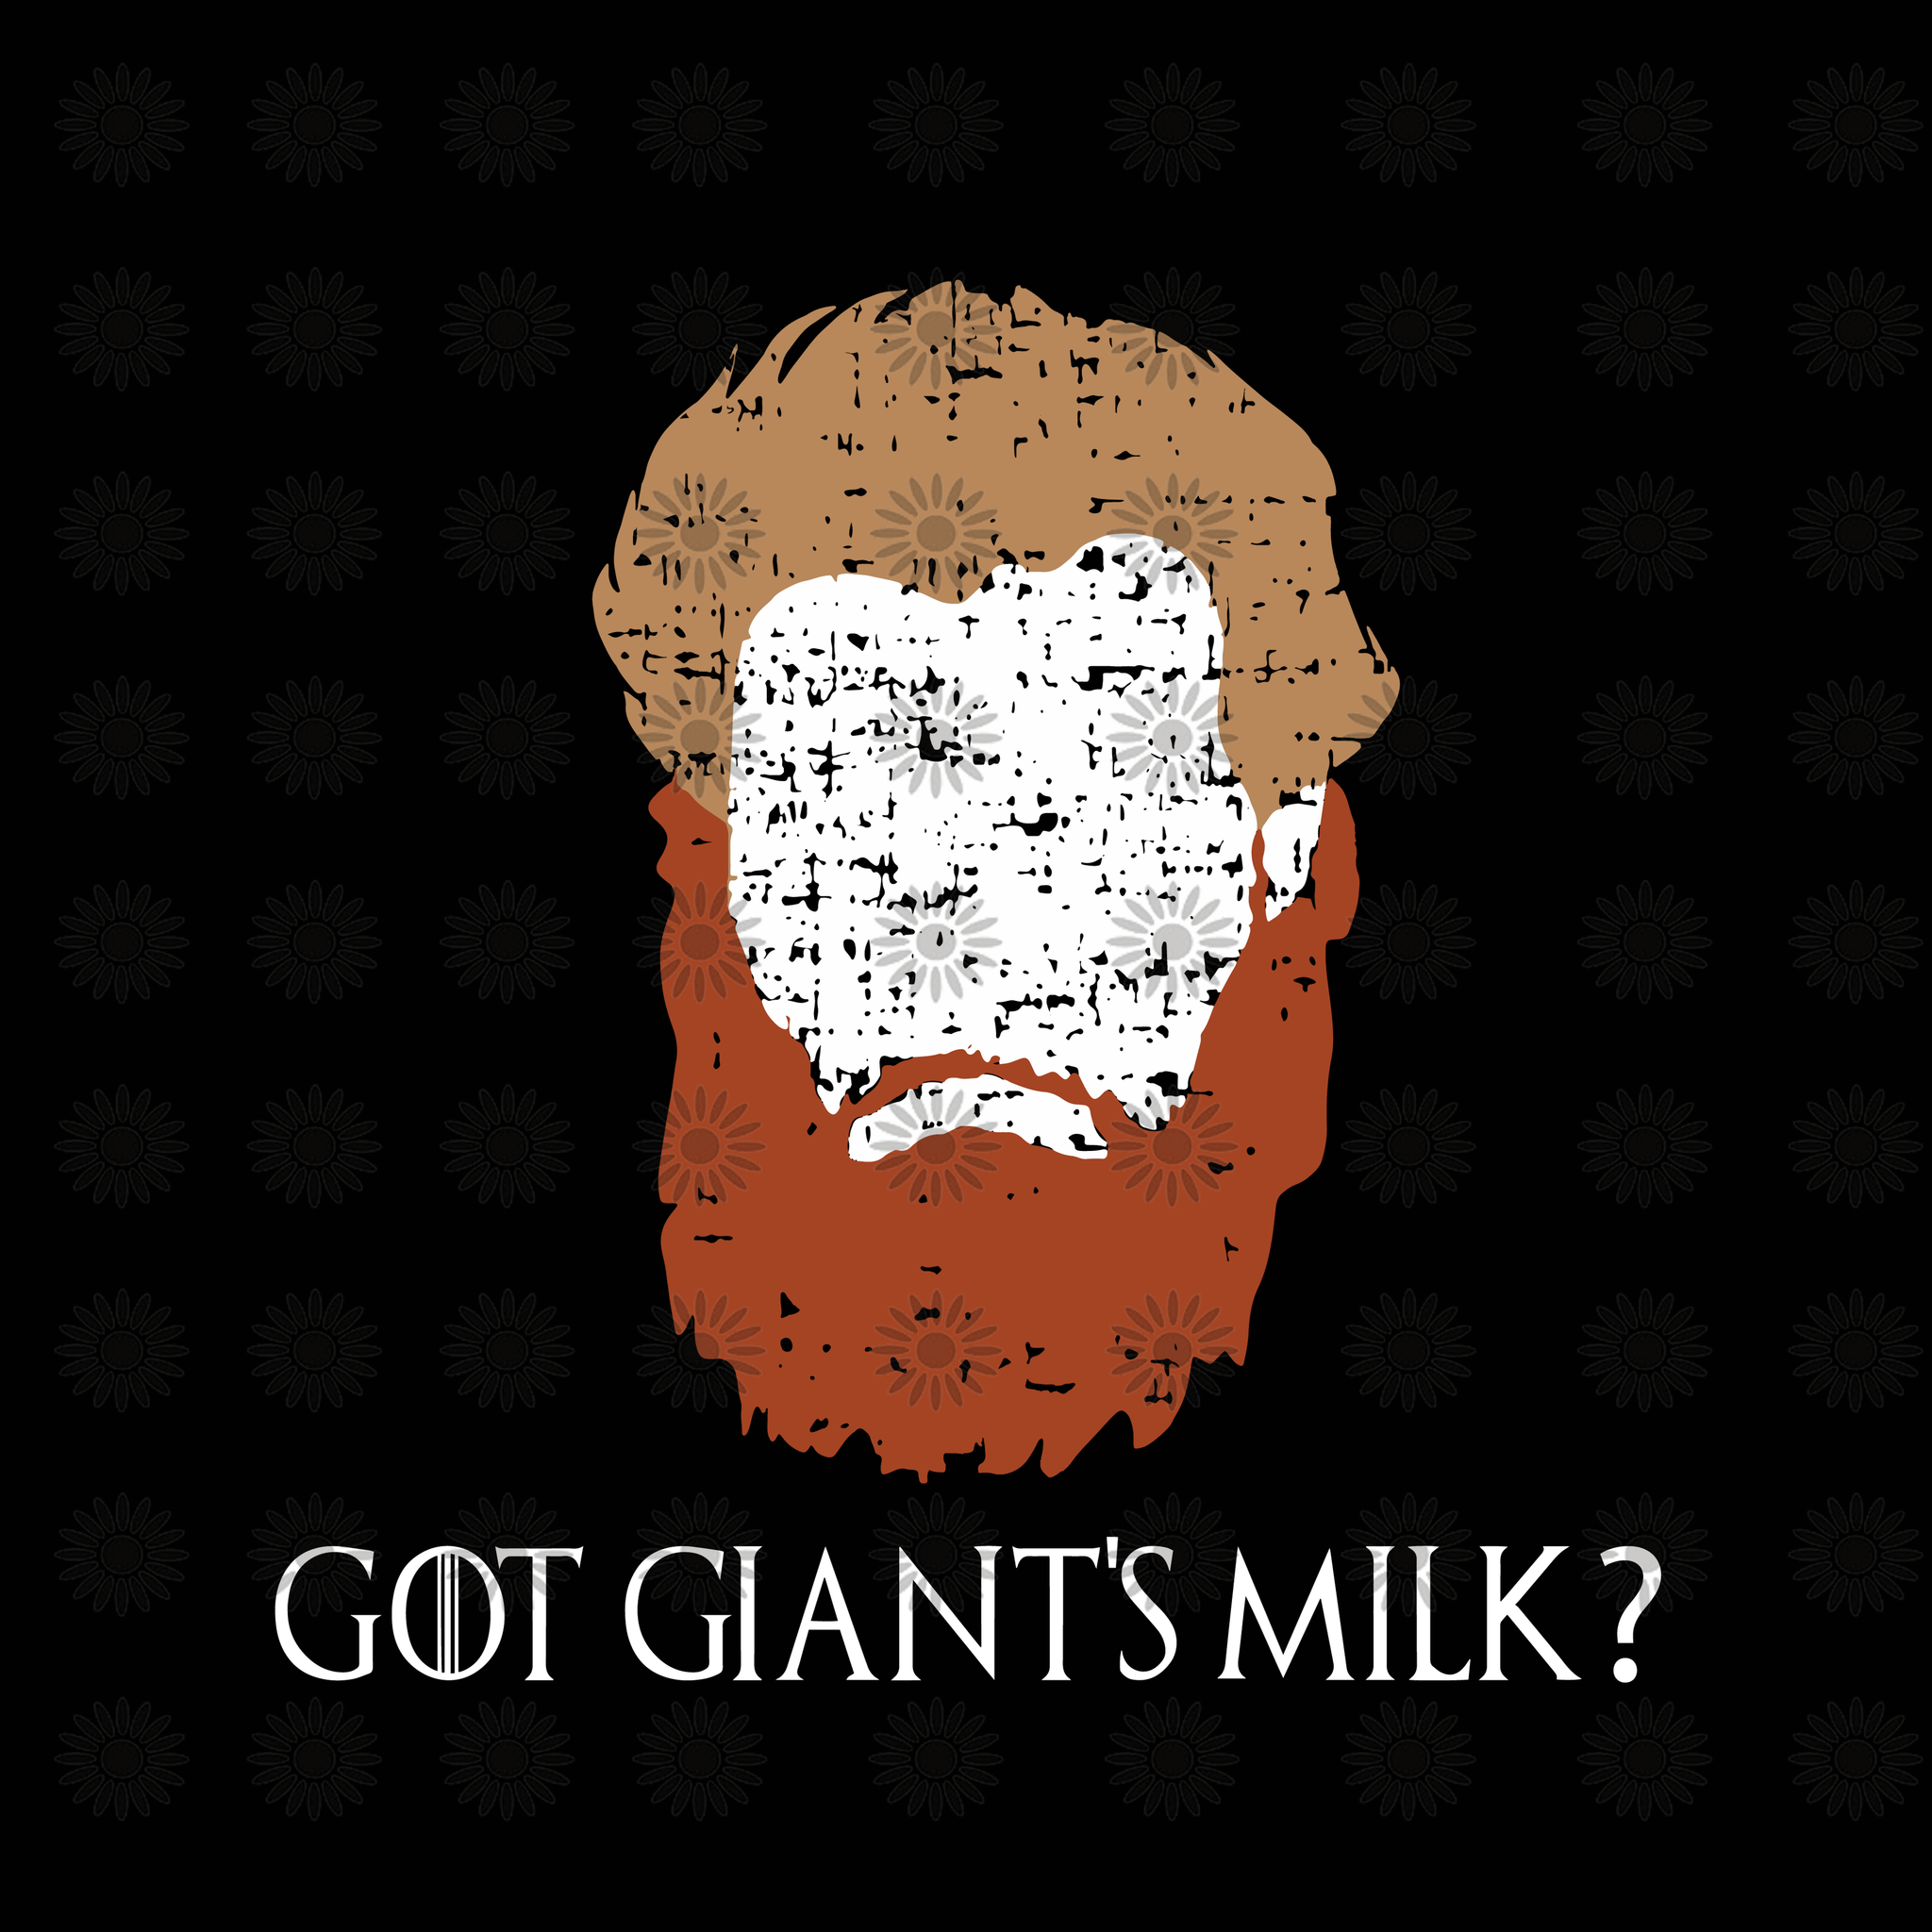 Got Giant's Milk svg, Game of Thrones svg, Game of Thrones clipart, Game of Thrones silhouette svg, png, dxf, eps file